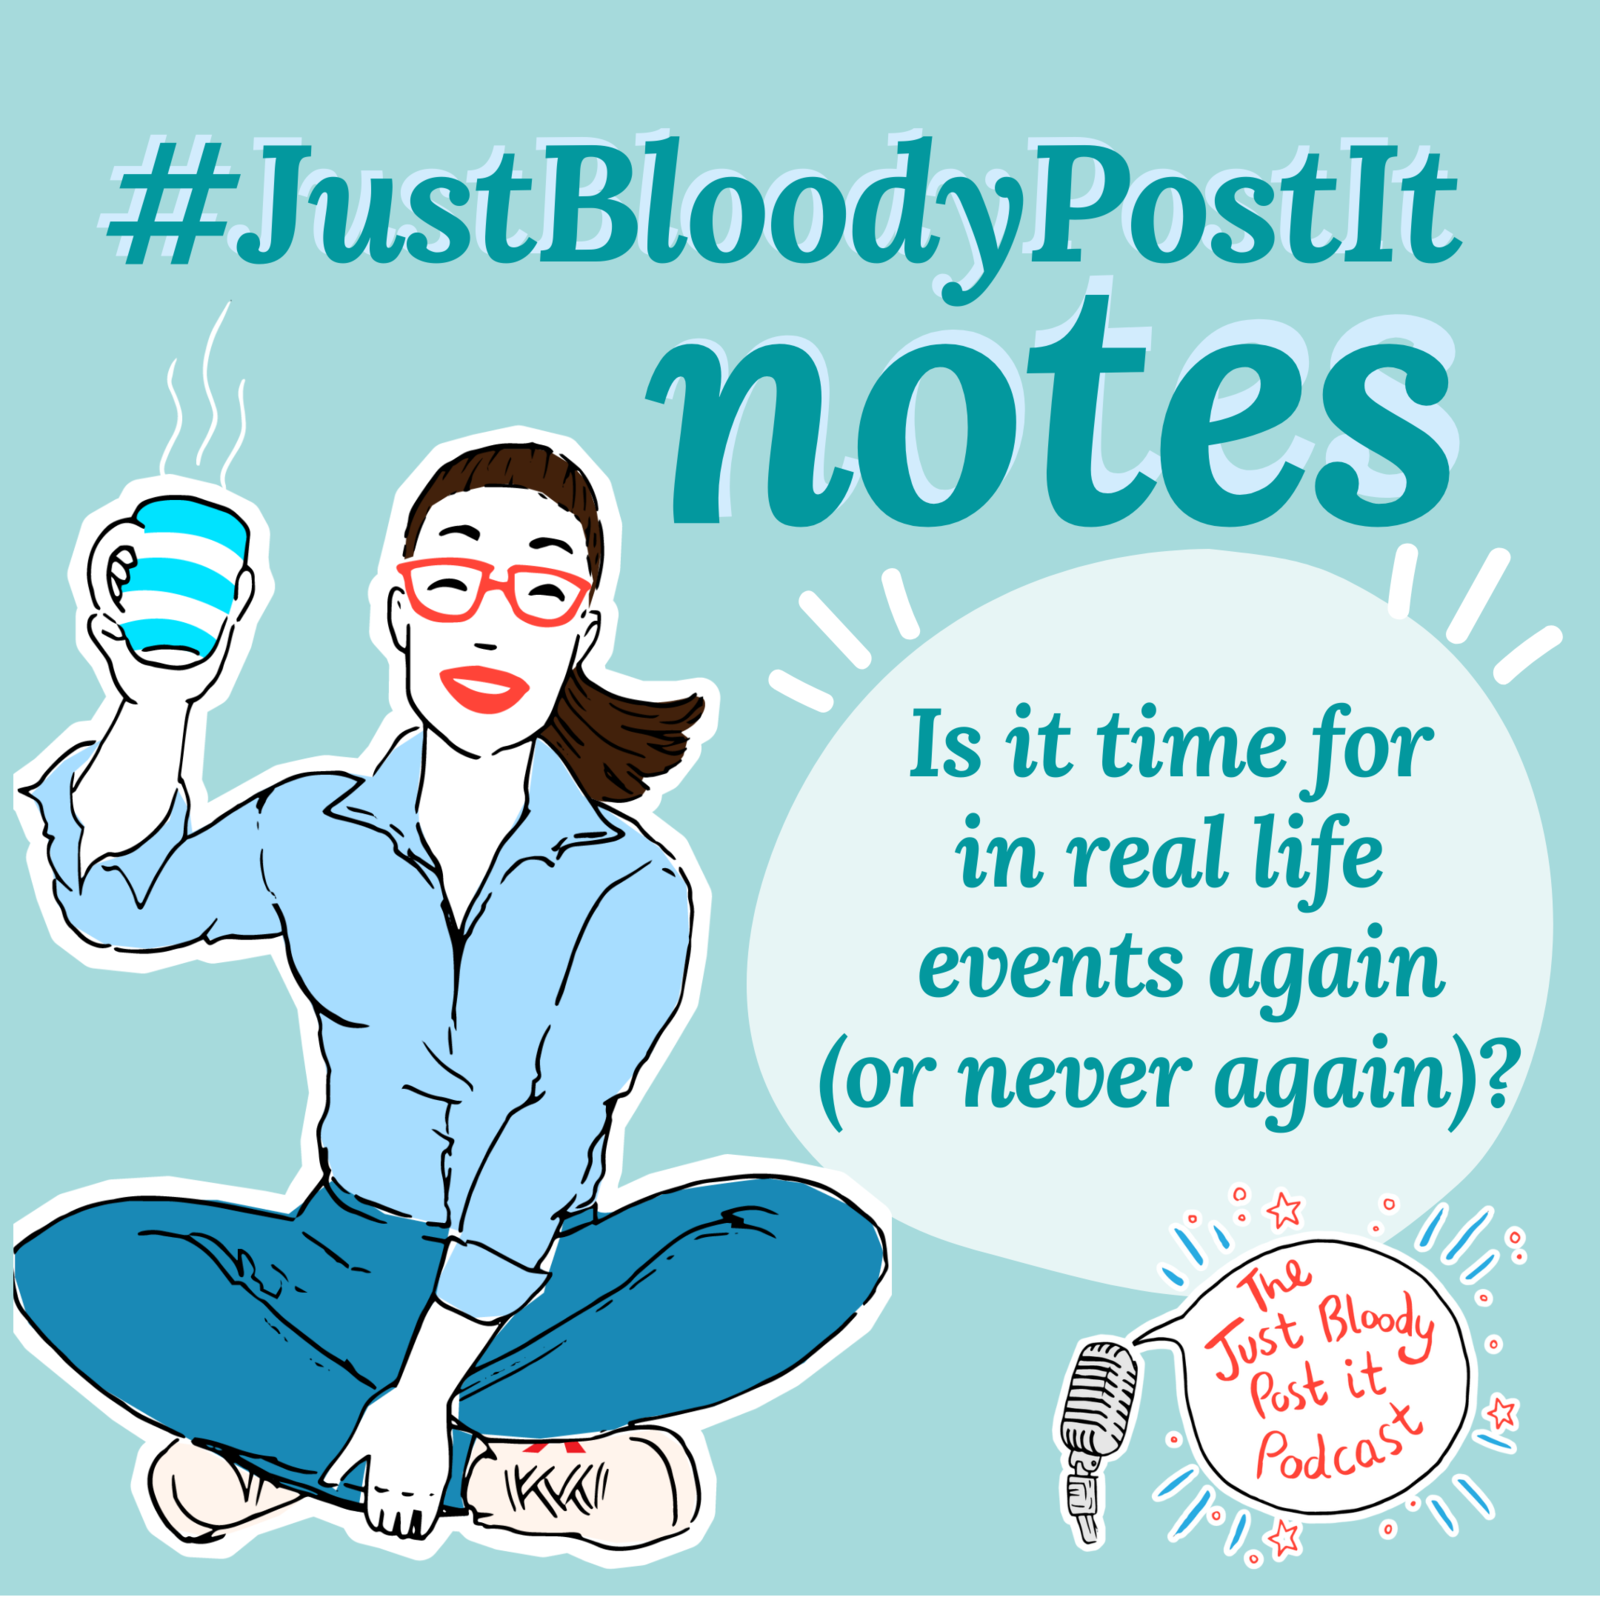 S3 Ep54: Is it time for real life events again? A #JustBloodyPostIt Note